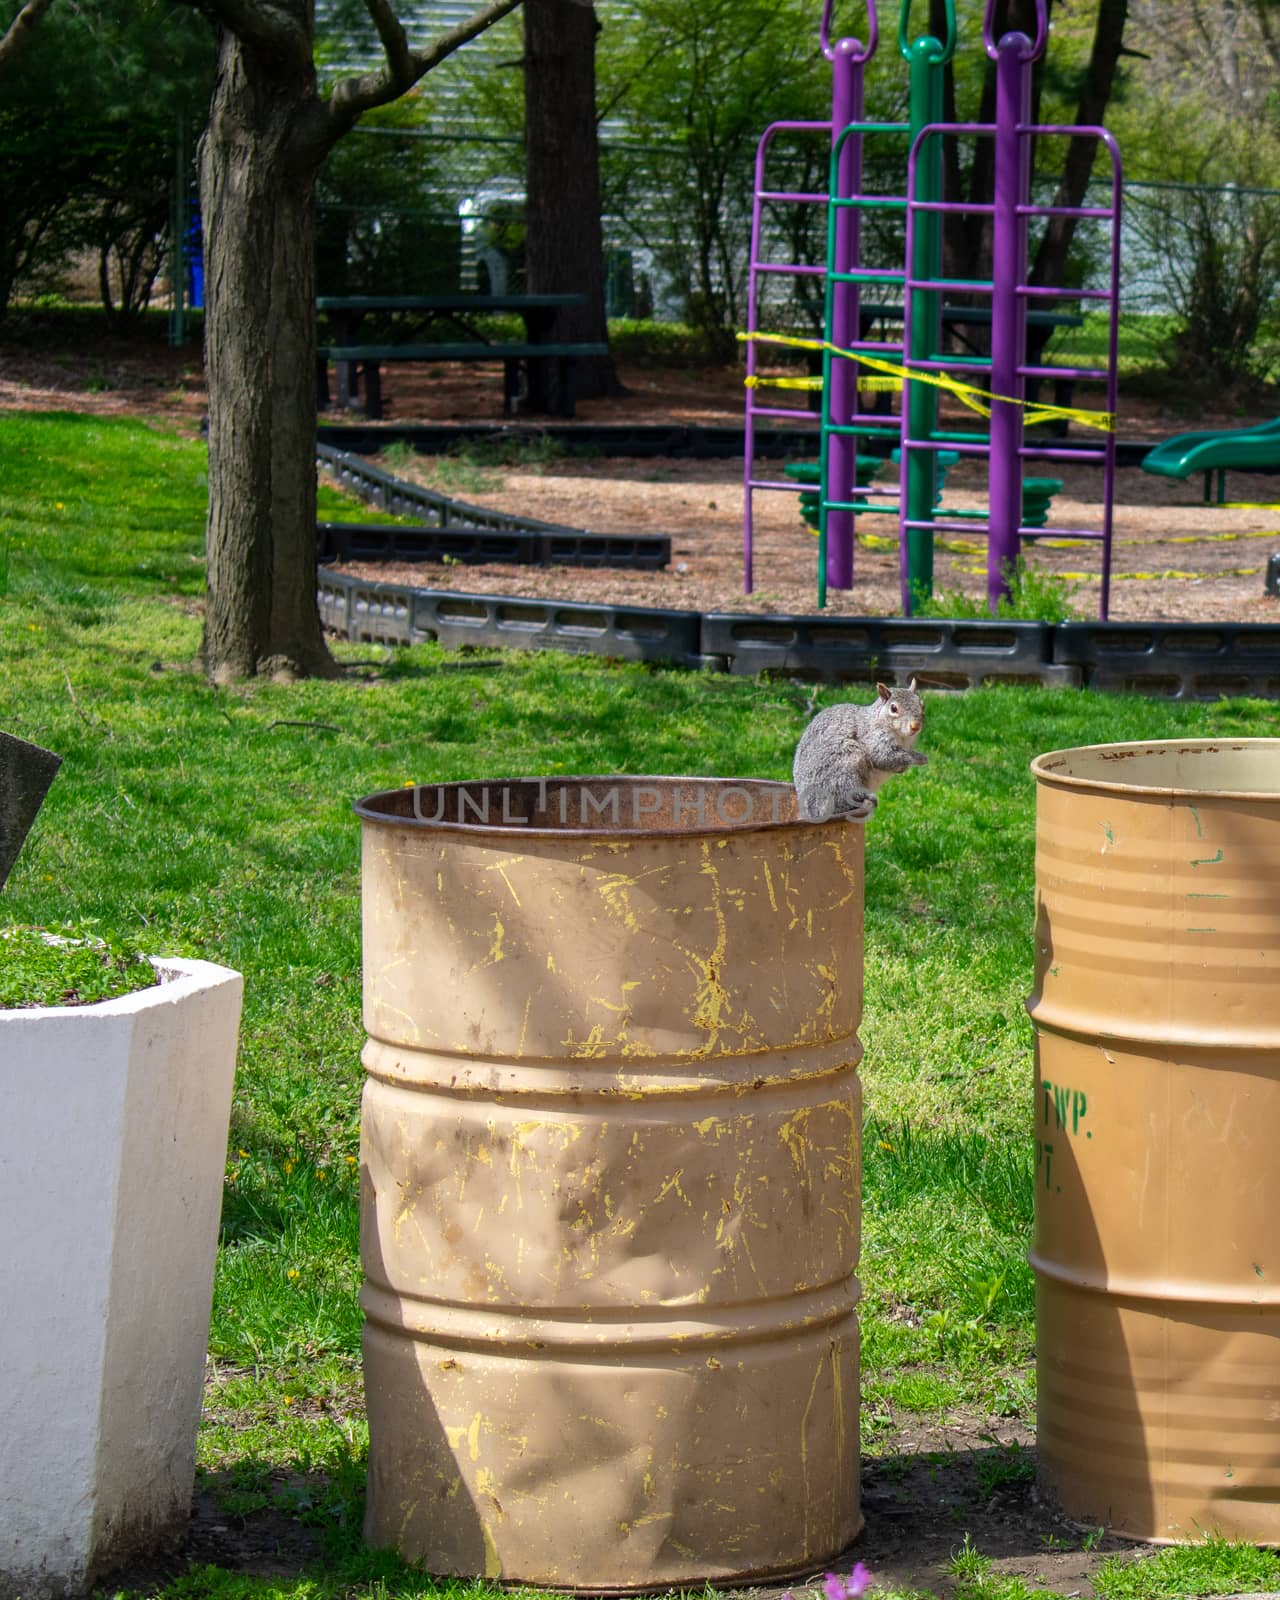 A Squirrel Sitting on a Metal Trash Can at a Park by bju12290